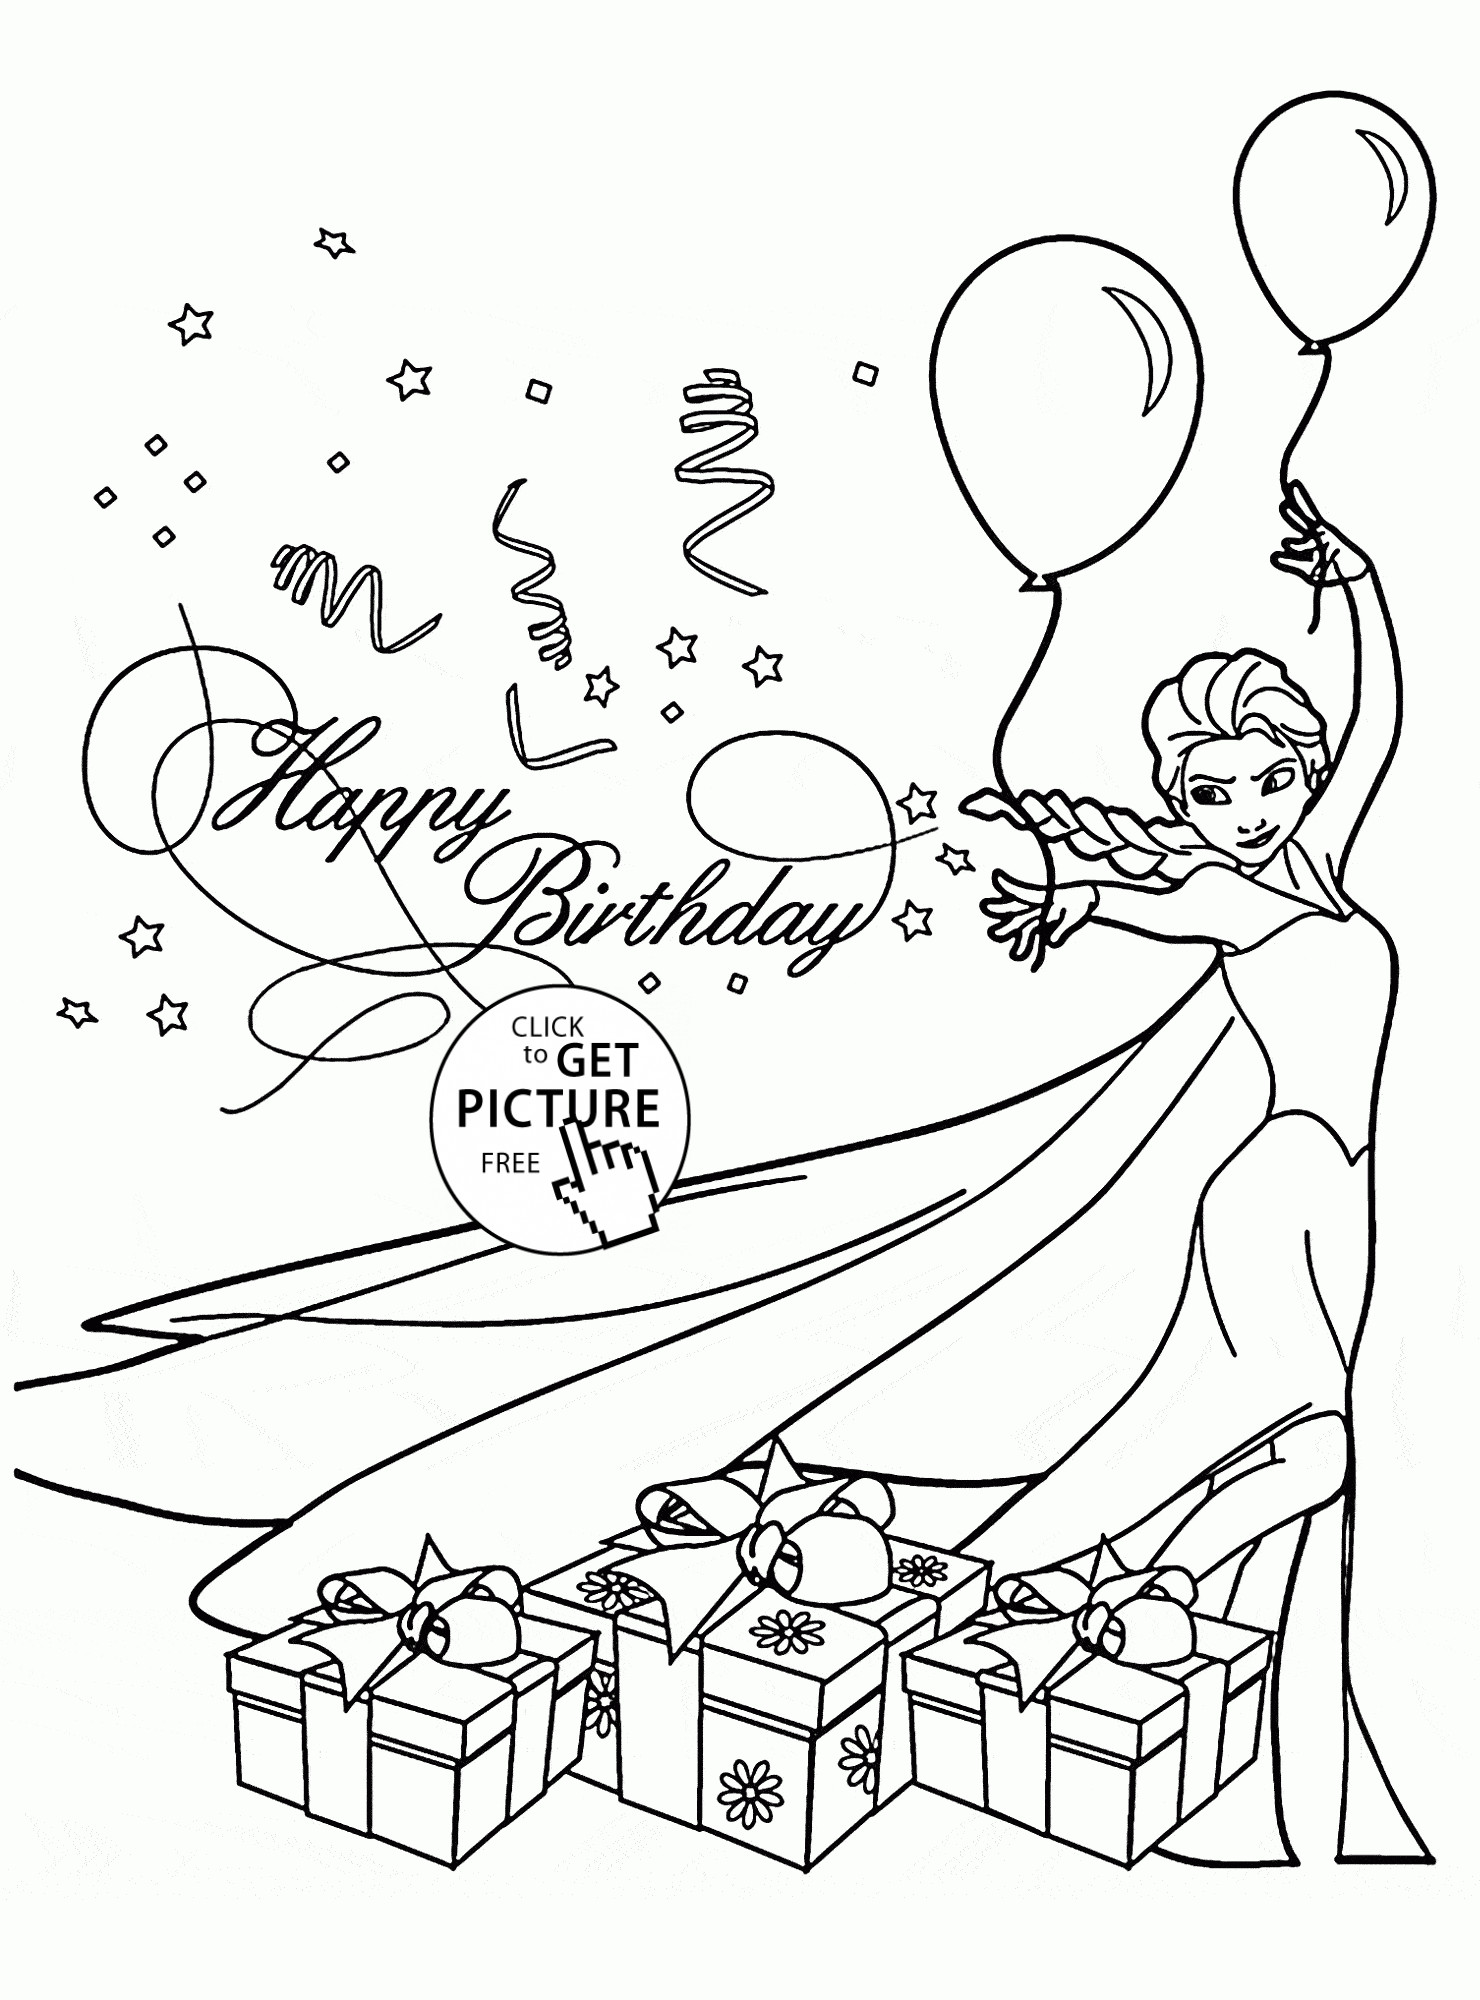 Coloring Birthday Cards
 Happy Birthday Card with Elsa coloring page for kids